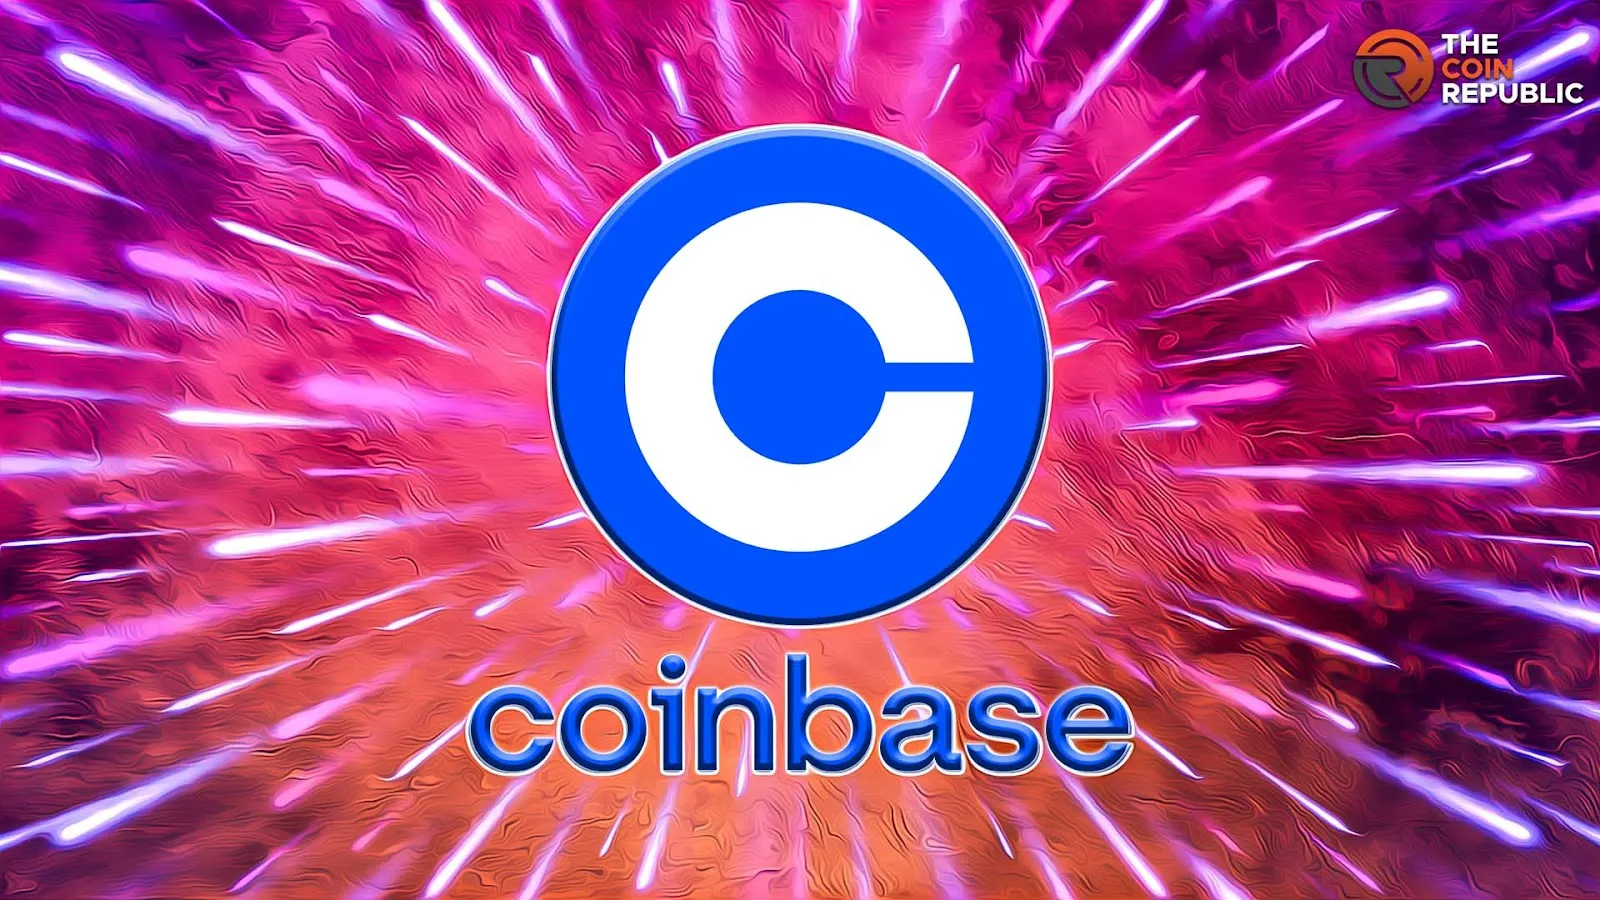 Coinbase Global Trades-off Odds to Crest Crypto Assets Market